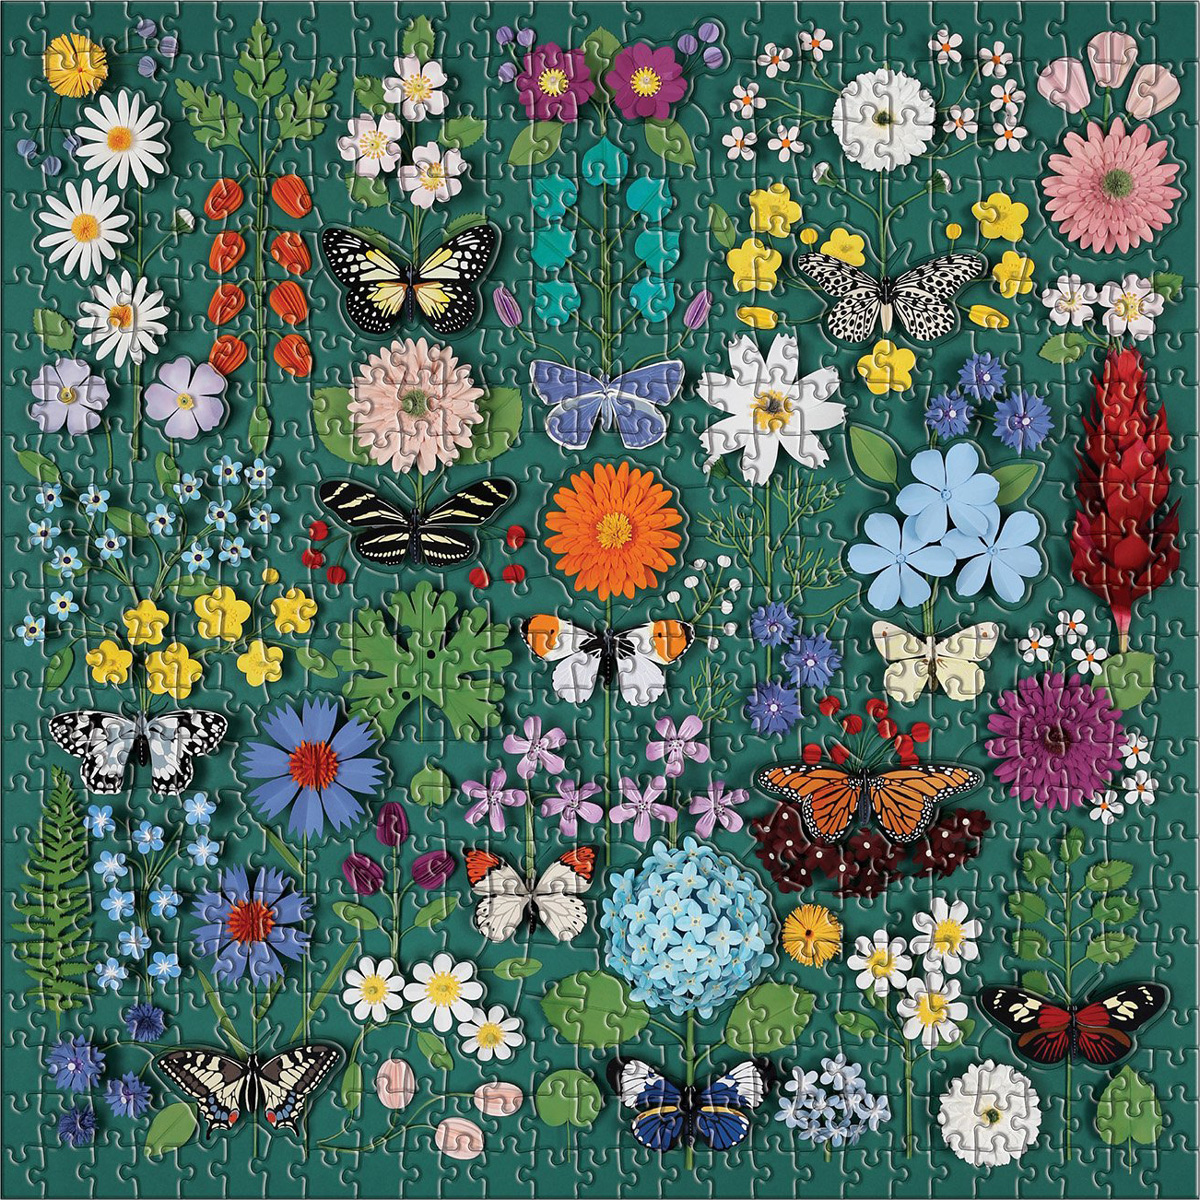 Butterfly Botanica with Shaped Pieces Butterflies and Insects Jigsaw Puzzle